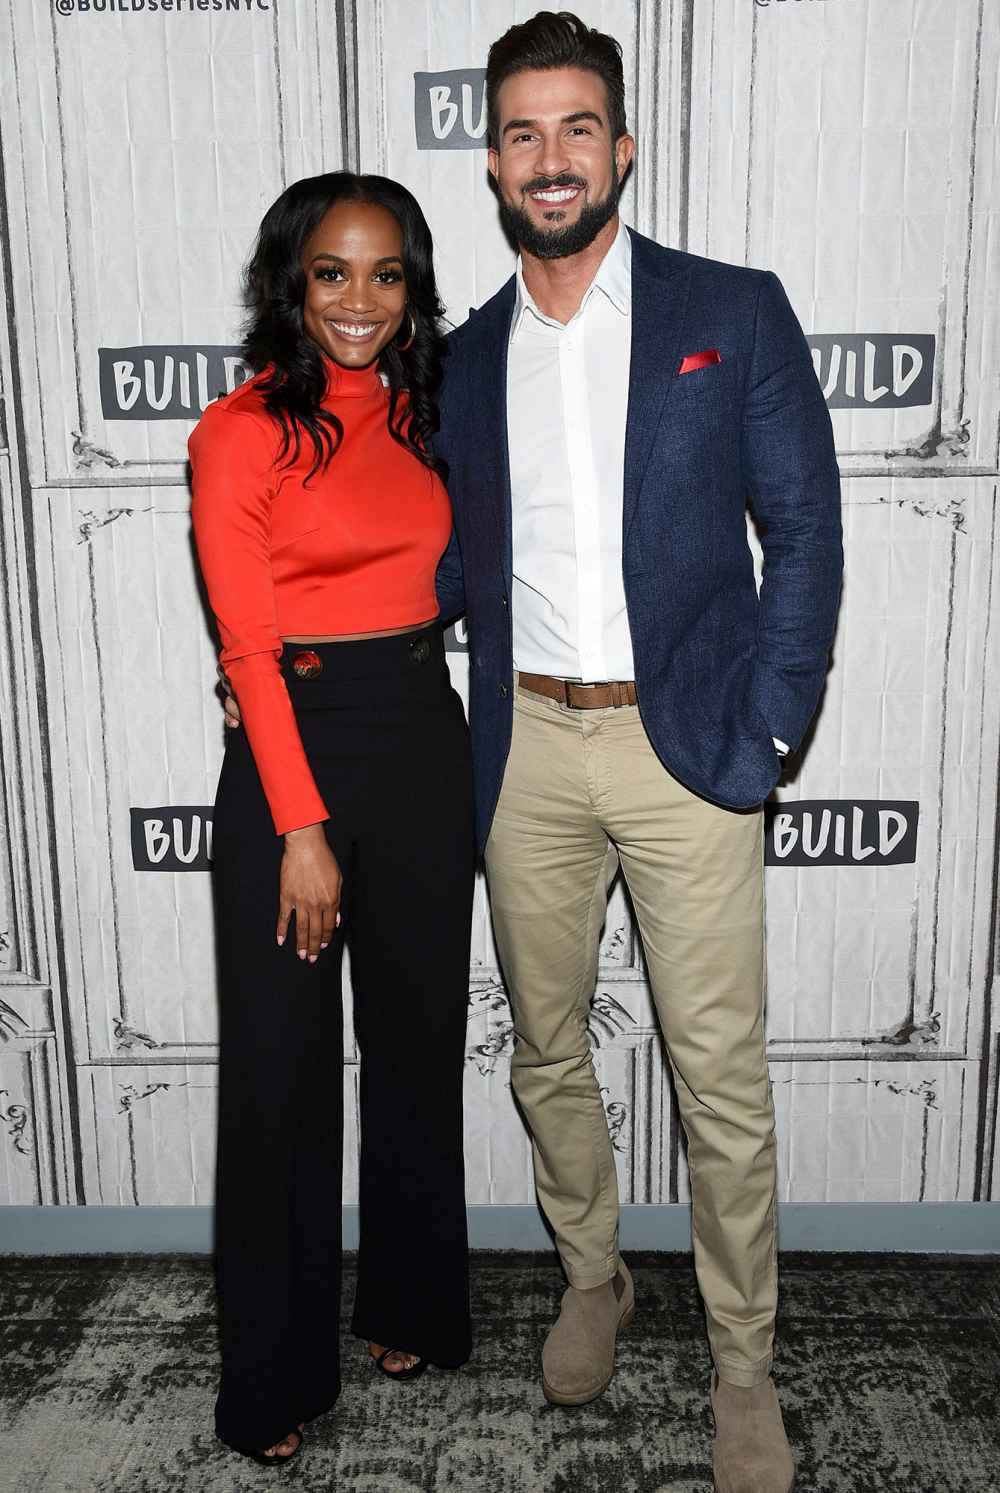 Rachel Lindsay Thinks Being Bicoastal Will Test Her Relationship With Bryan Abasolo